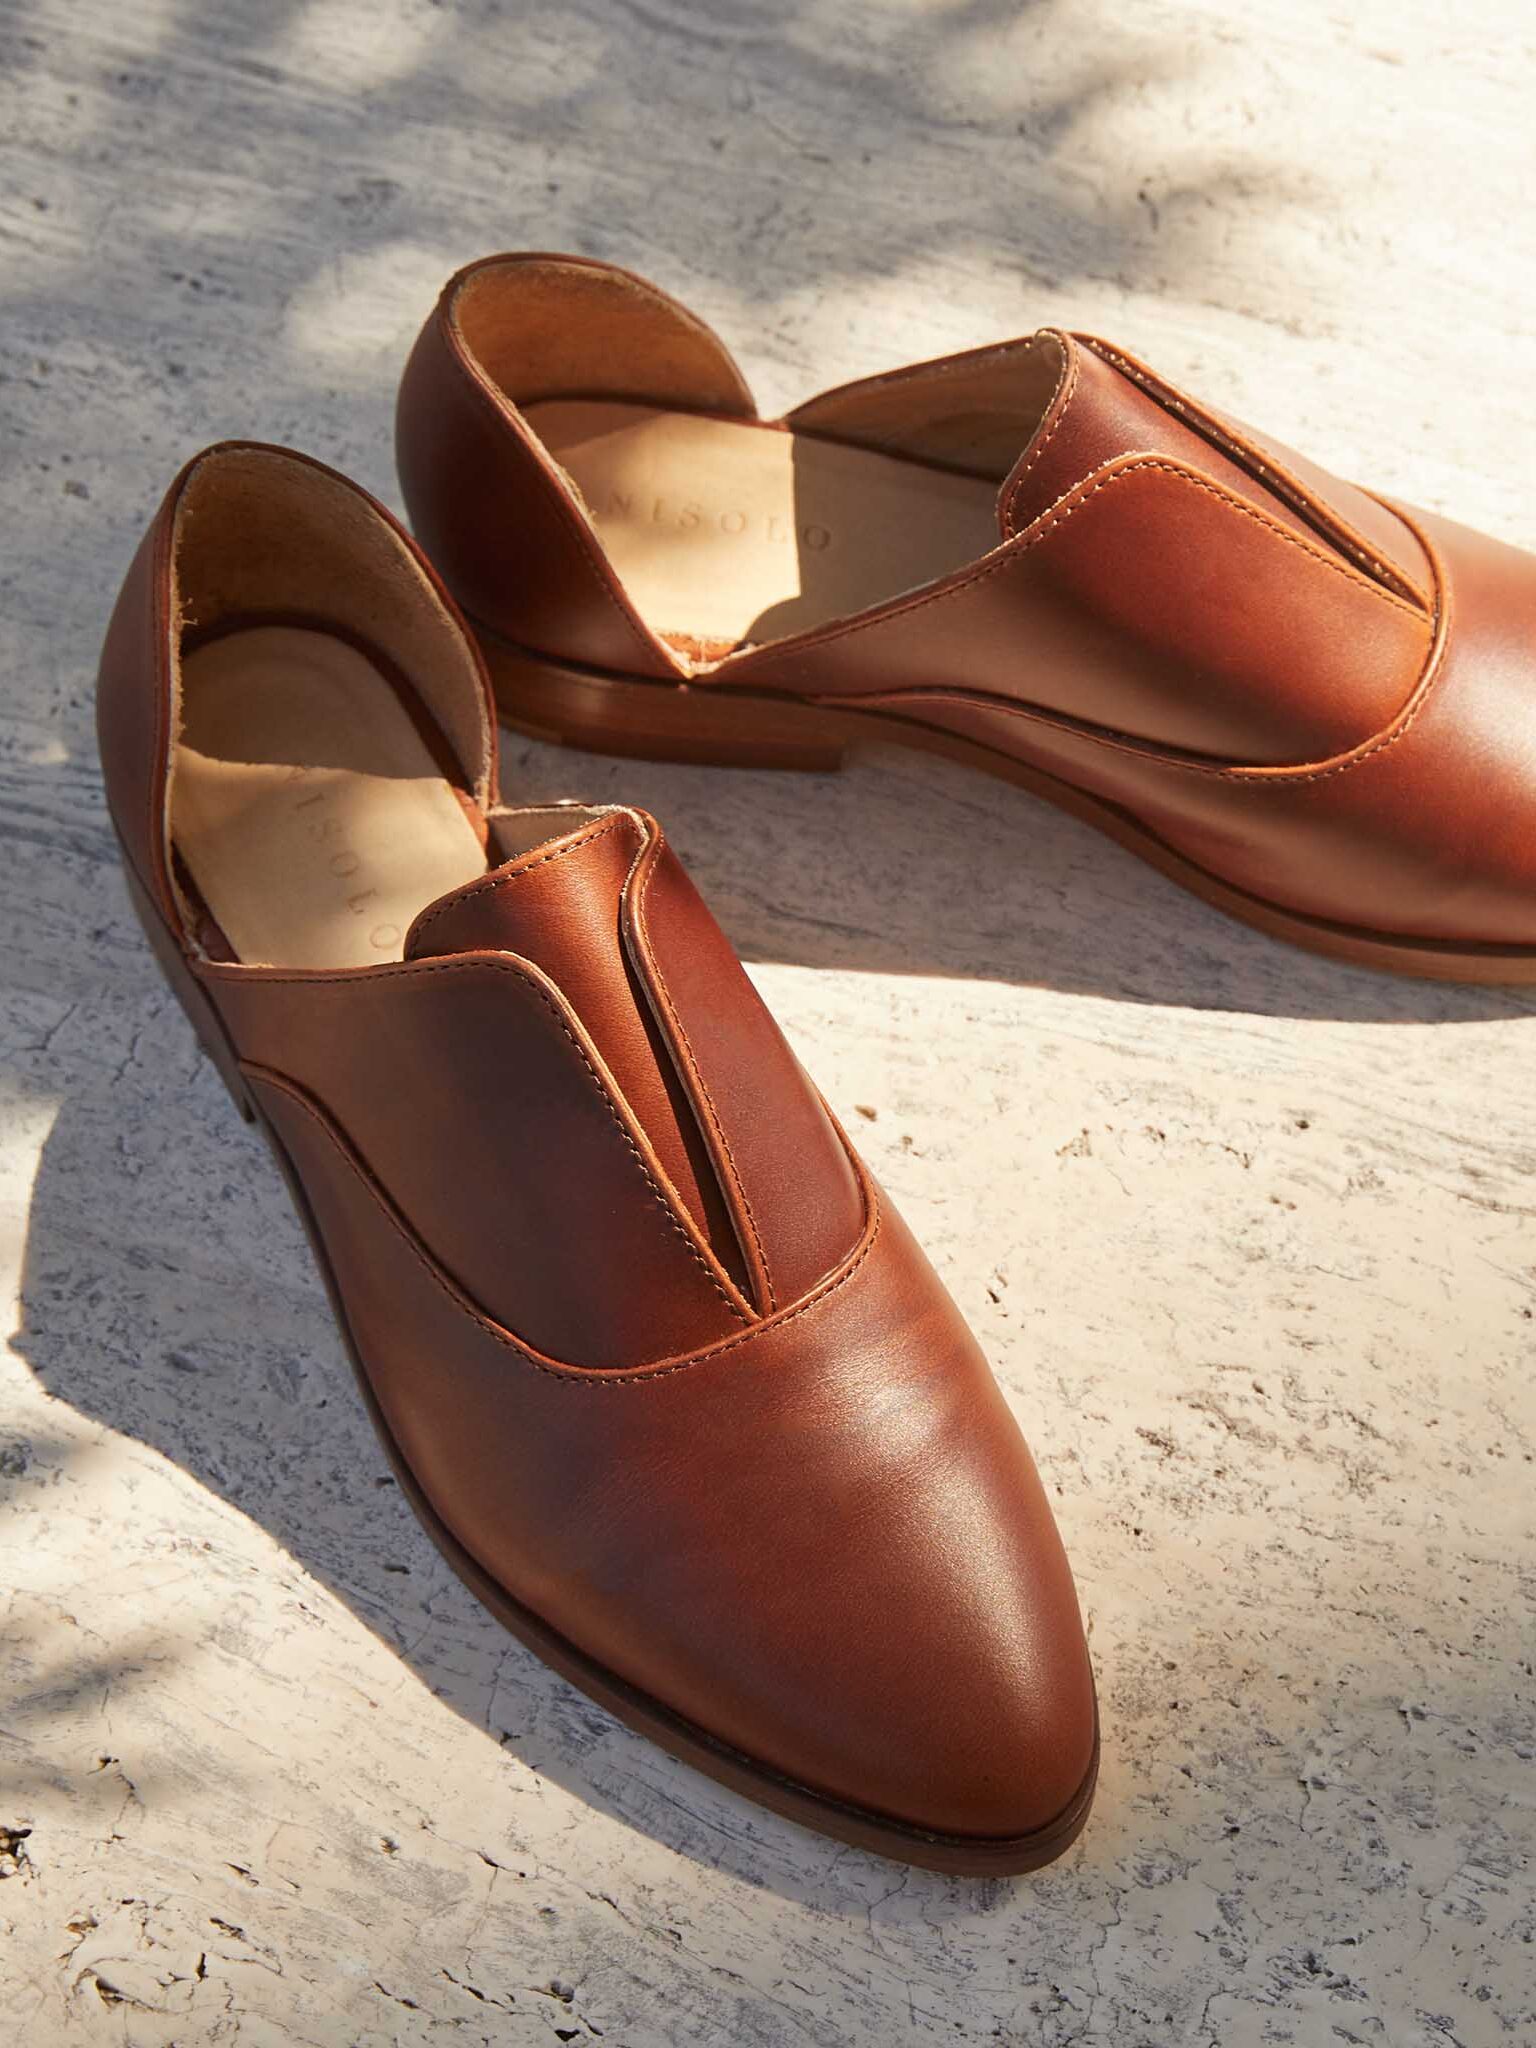 Nisolo sustainable d'orsay style loafers.